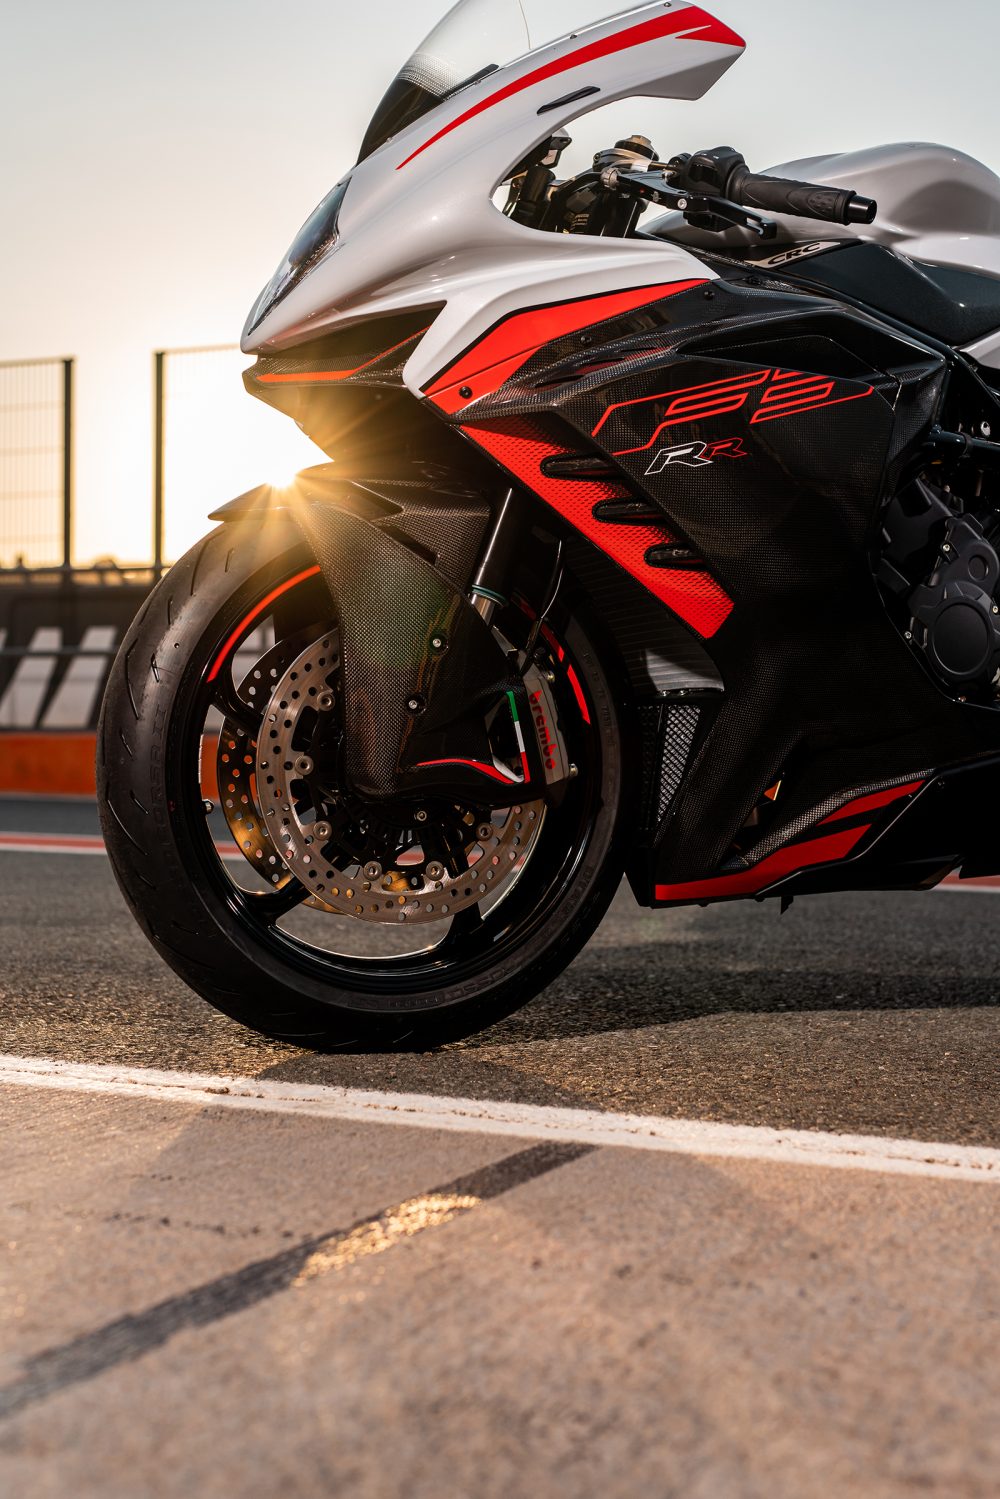 The 2022 MV Agusta F3 RR is the ultimate supersport motorcycle